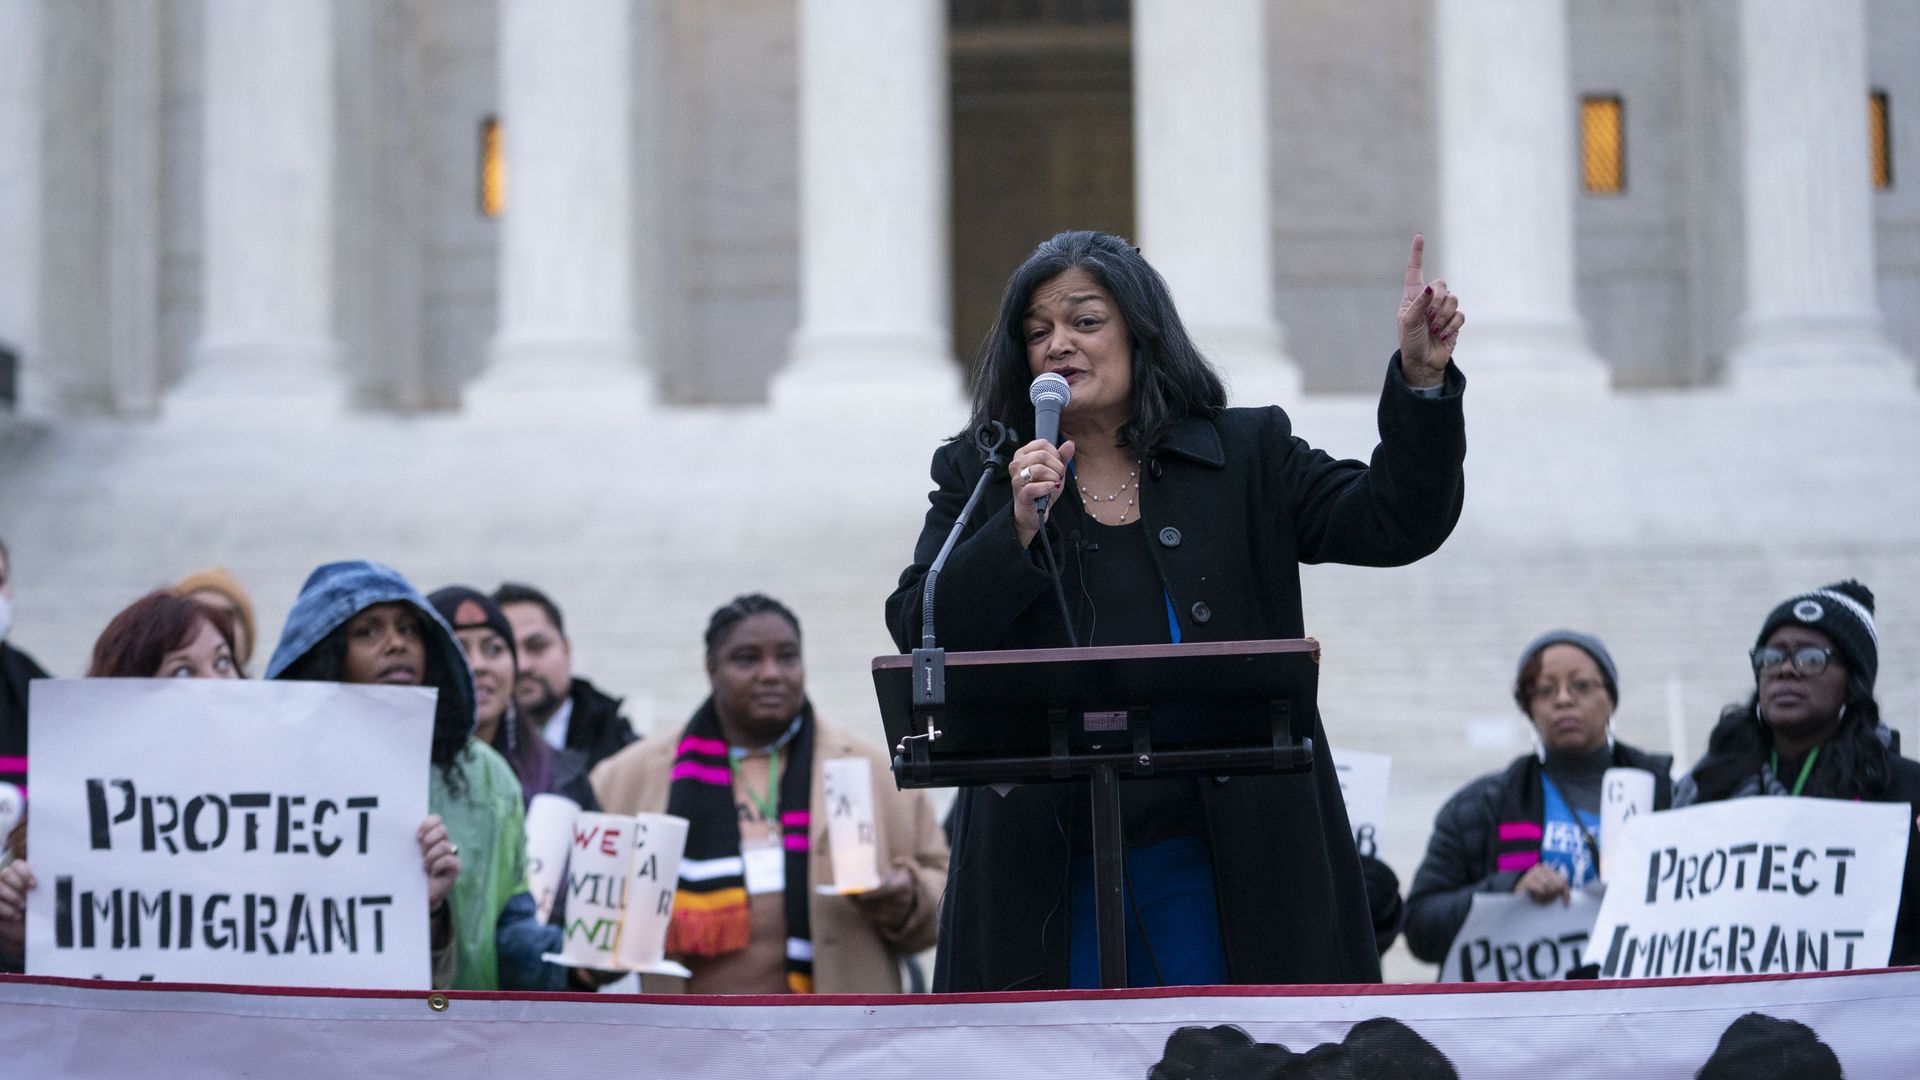 Representative Pramila Jayapal, a Democrat from Washington, speaks during a rally in support of DACA outside the US Supreme Court